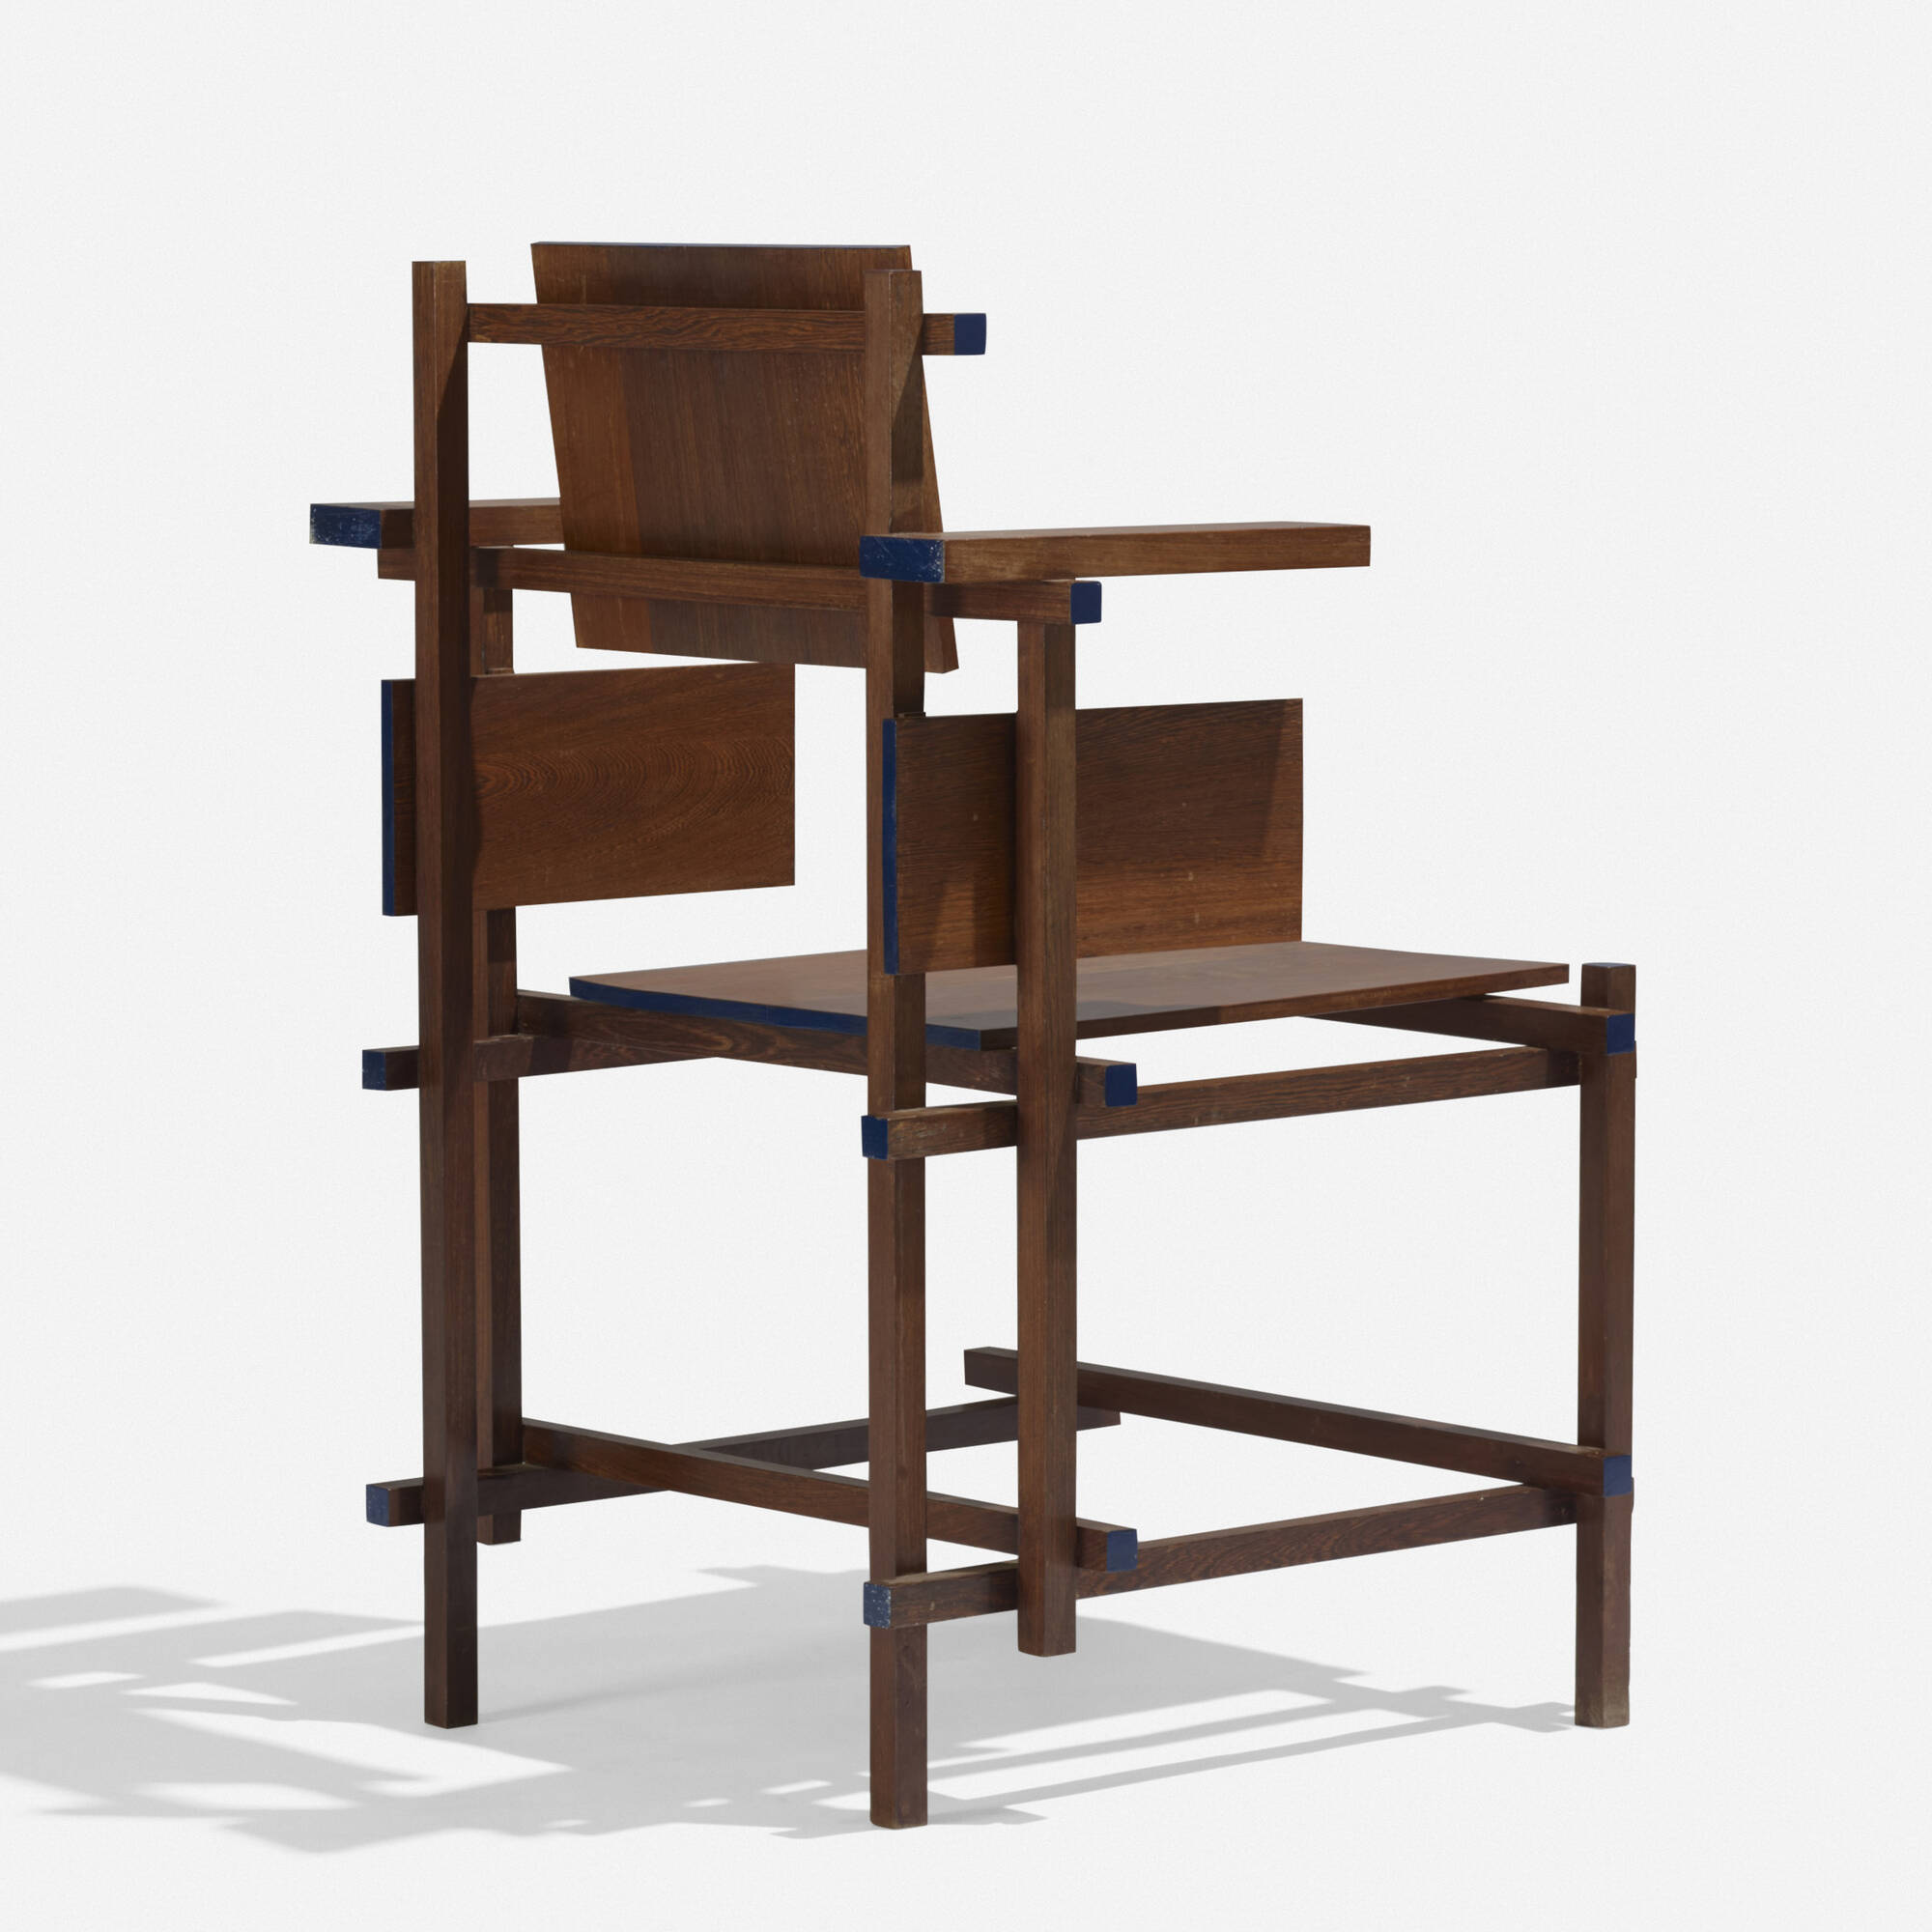 Storing Bedankt mythologie 107: GERRIT RIETVELD, Hoge Stoel < International Style: The Boyd  Collection, 7 November 2019 < Auctions | Wright: Auctions of Art and Design